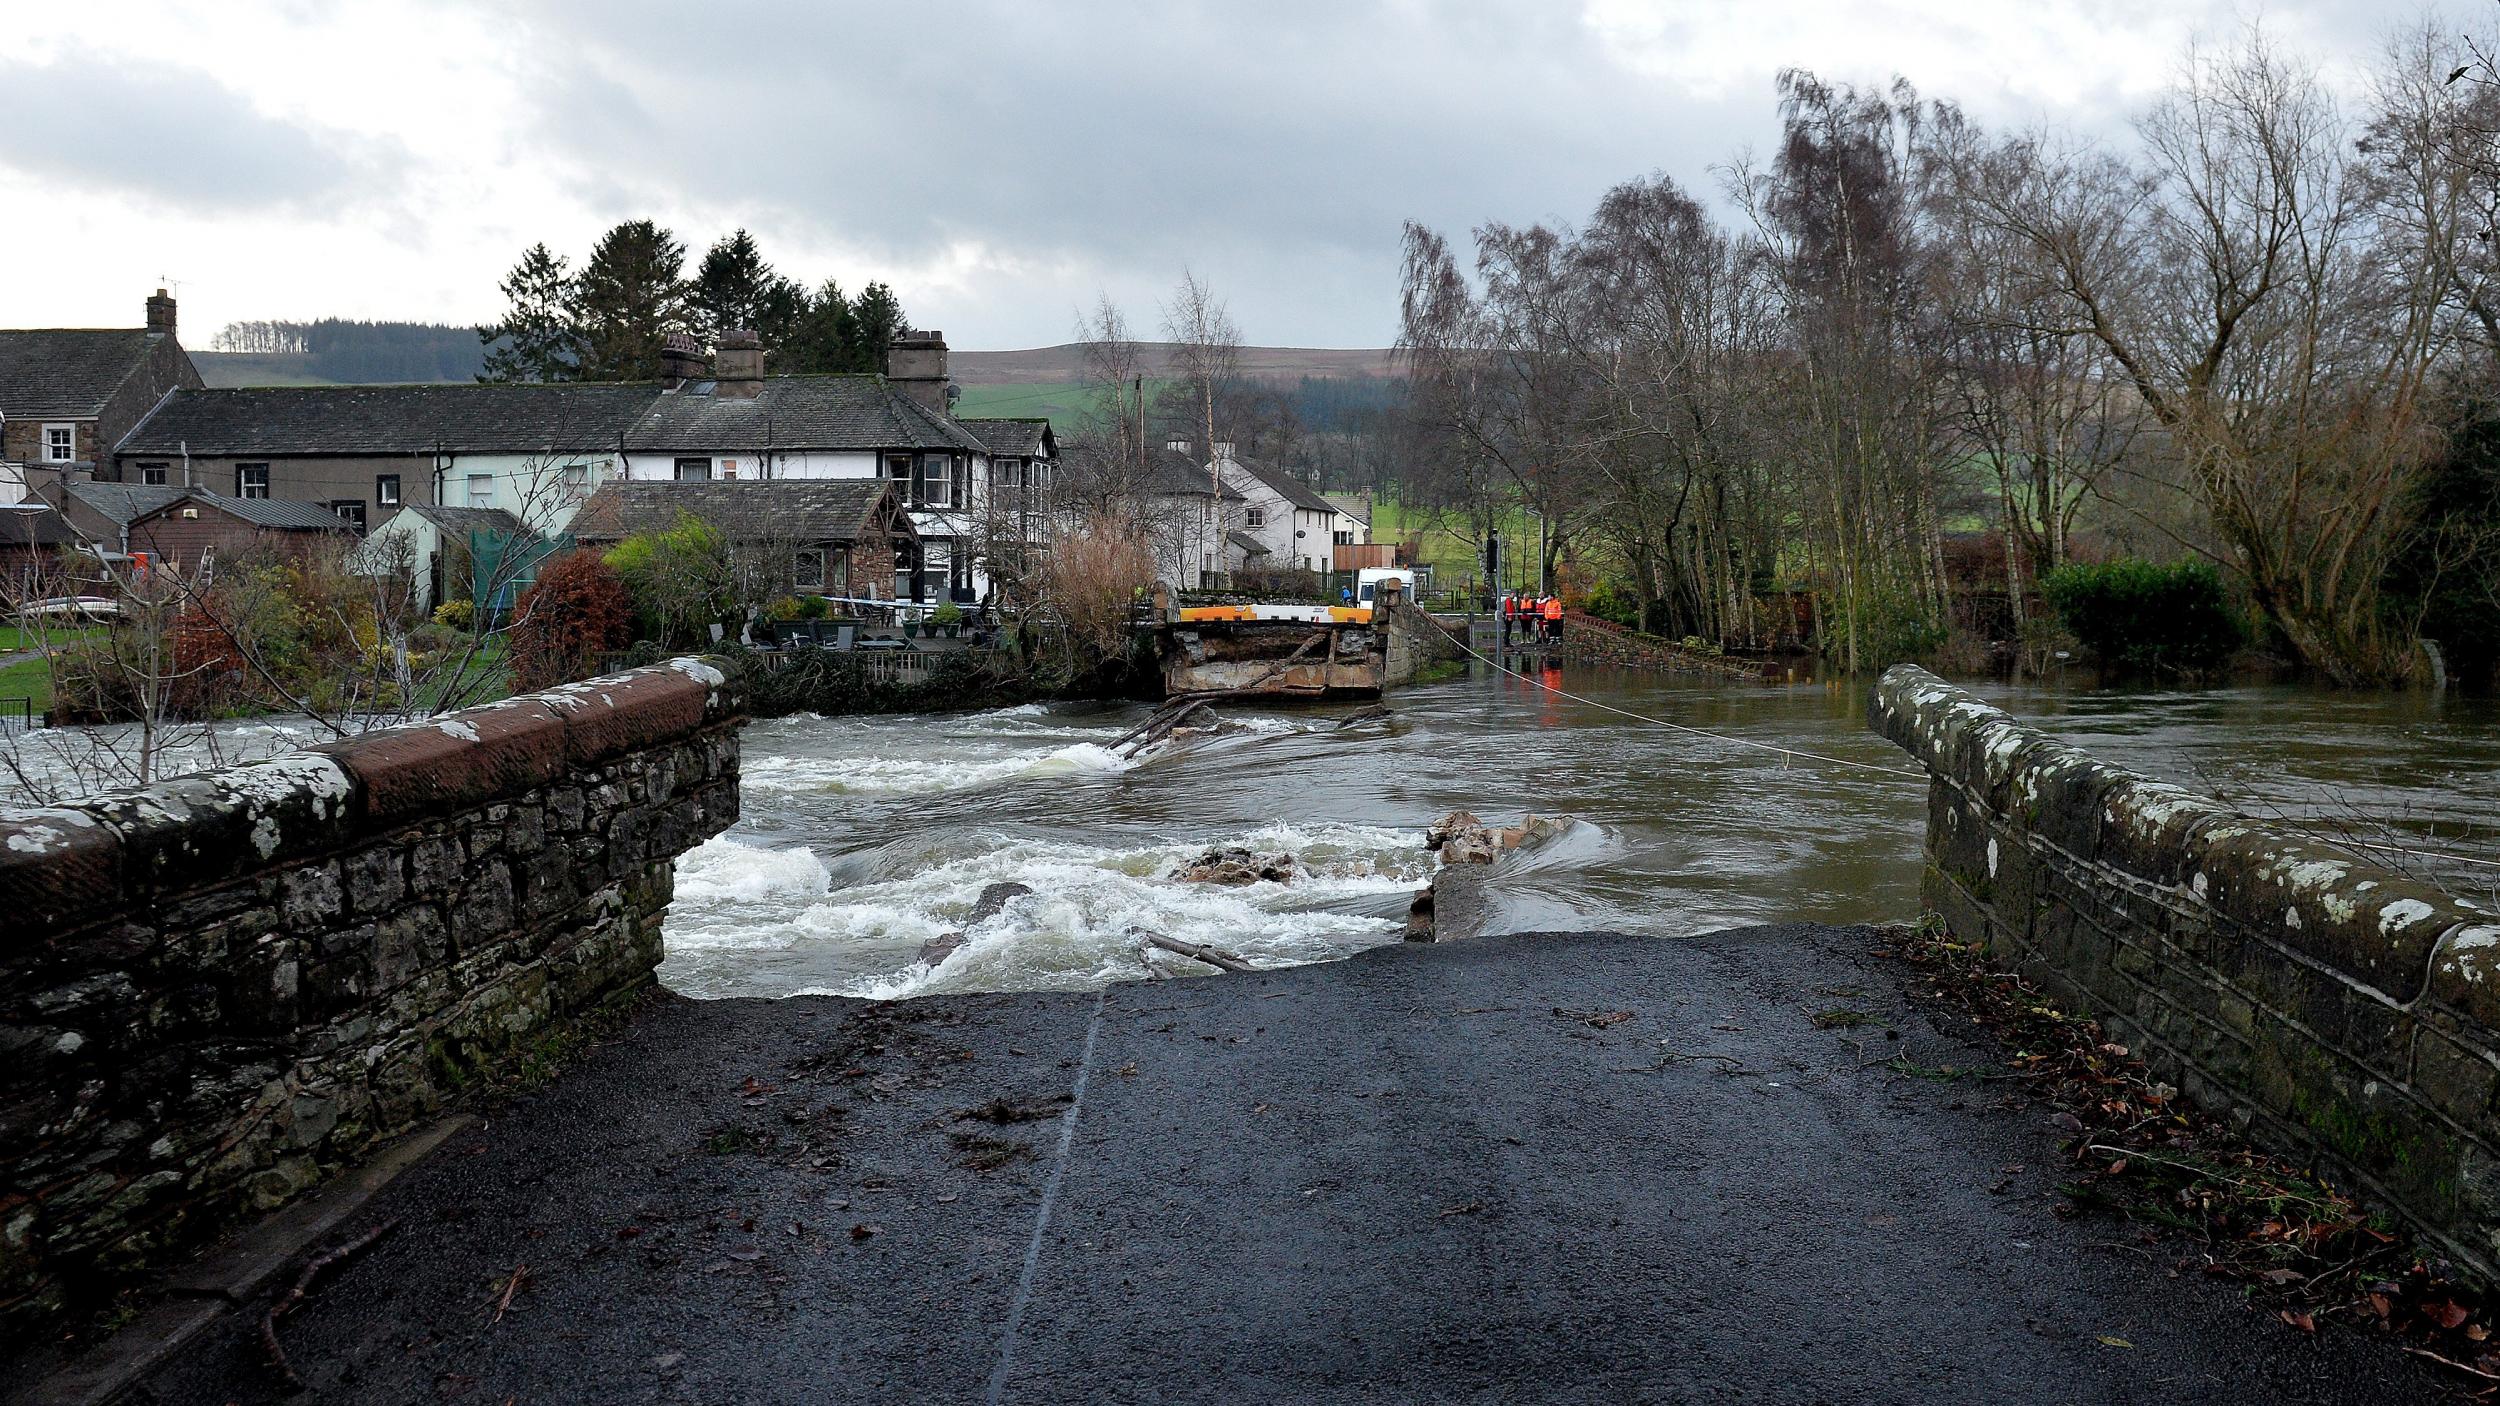  Pooley Bridge only recently collapsed, with incredible footage taken on December 6 showing the structure crumbling into the fast-flowing River Eamont